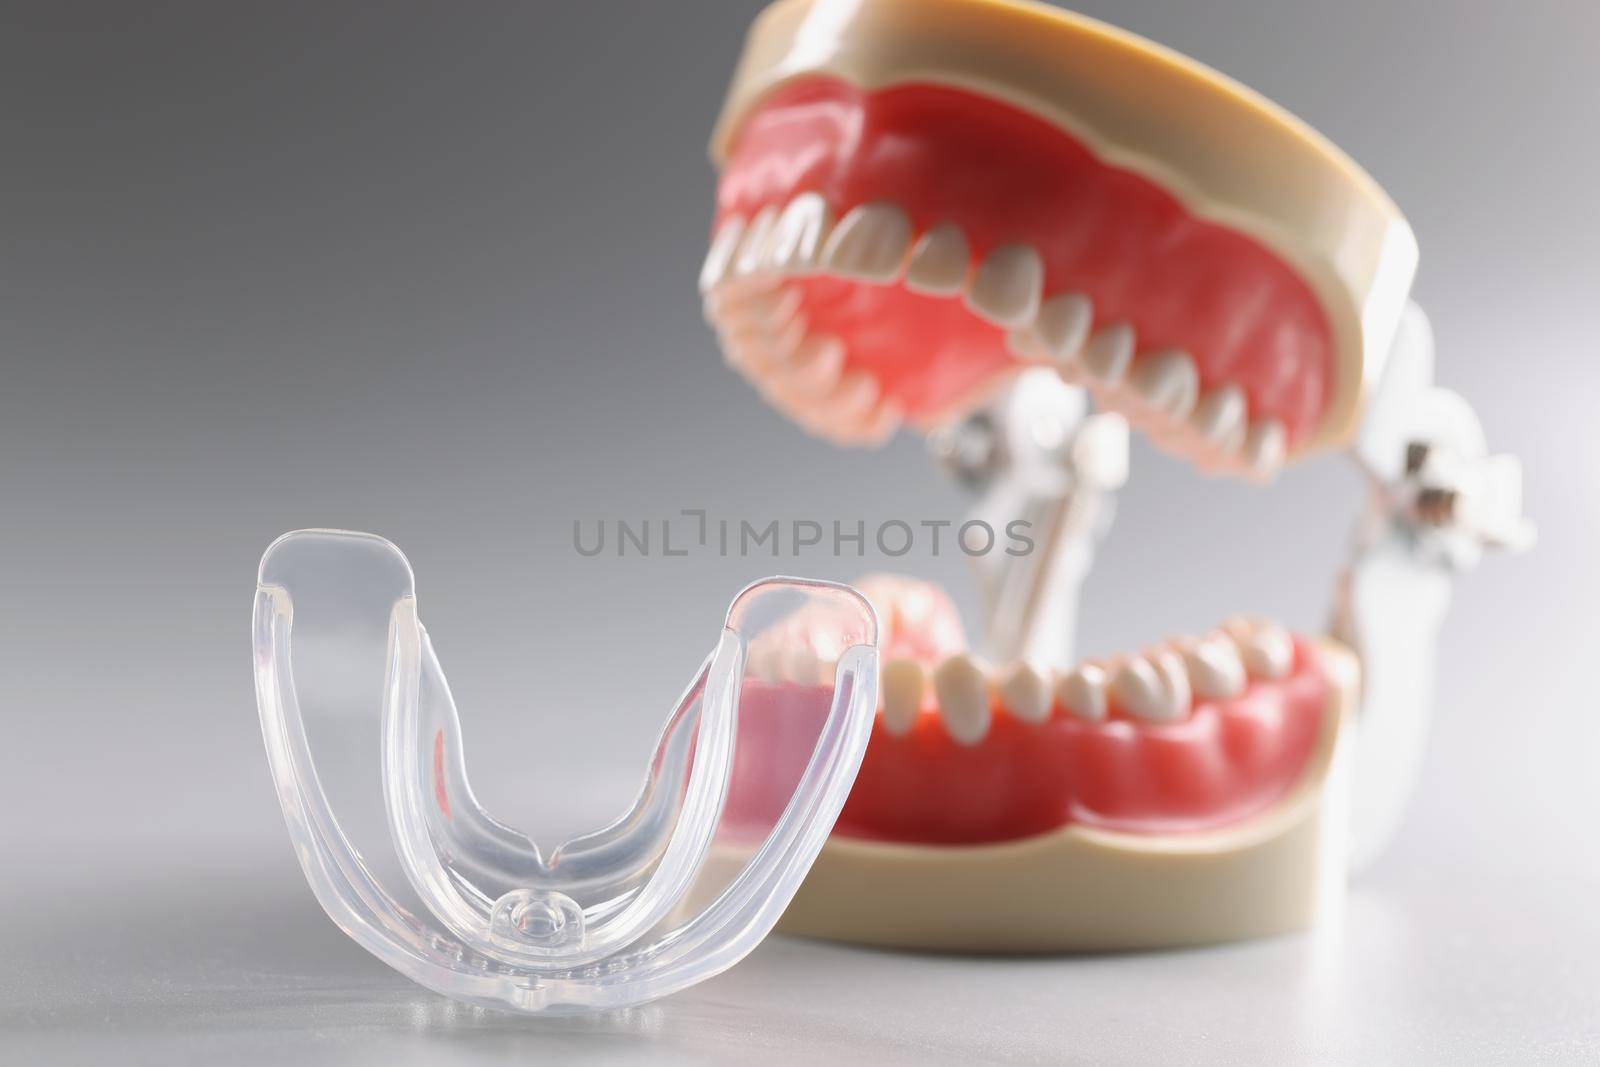 Plastic model of an open human jaw on a gray background by kuprevich